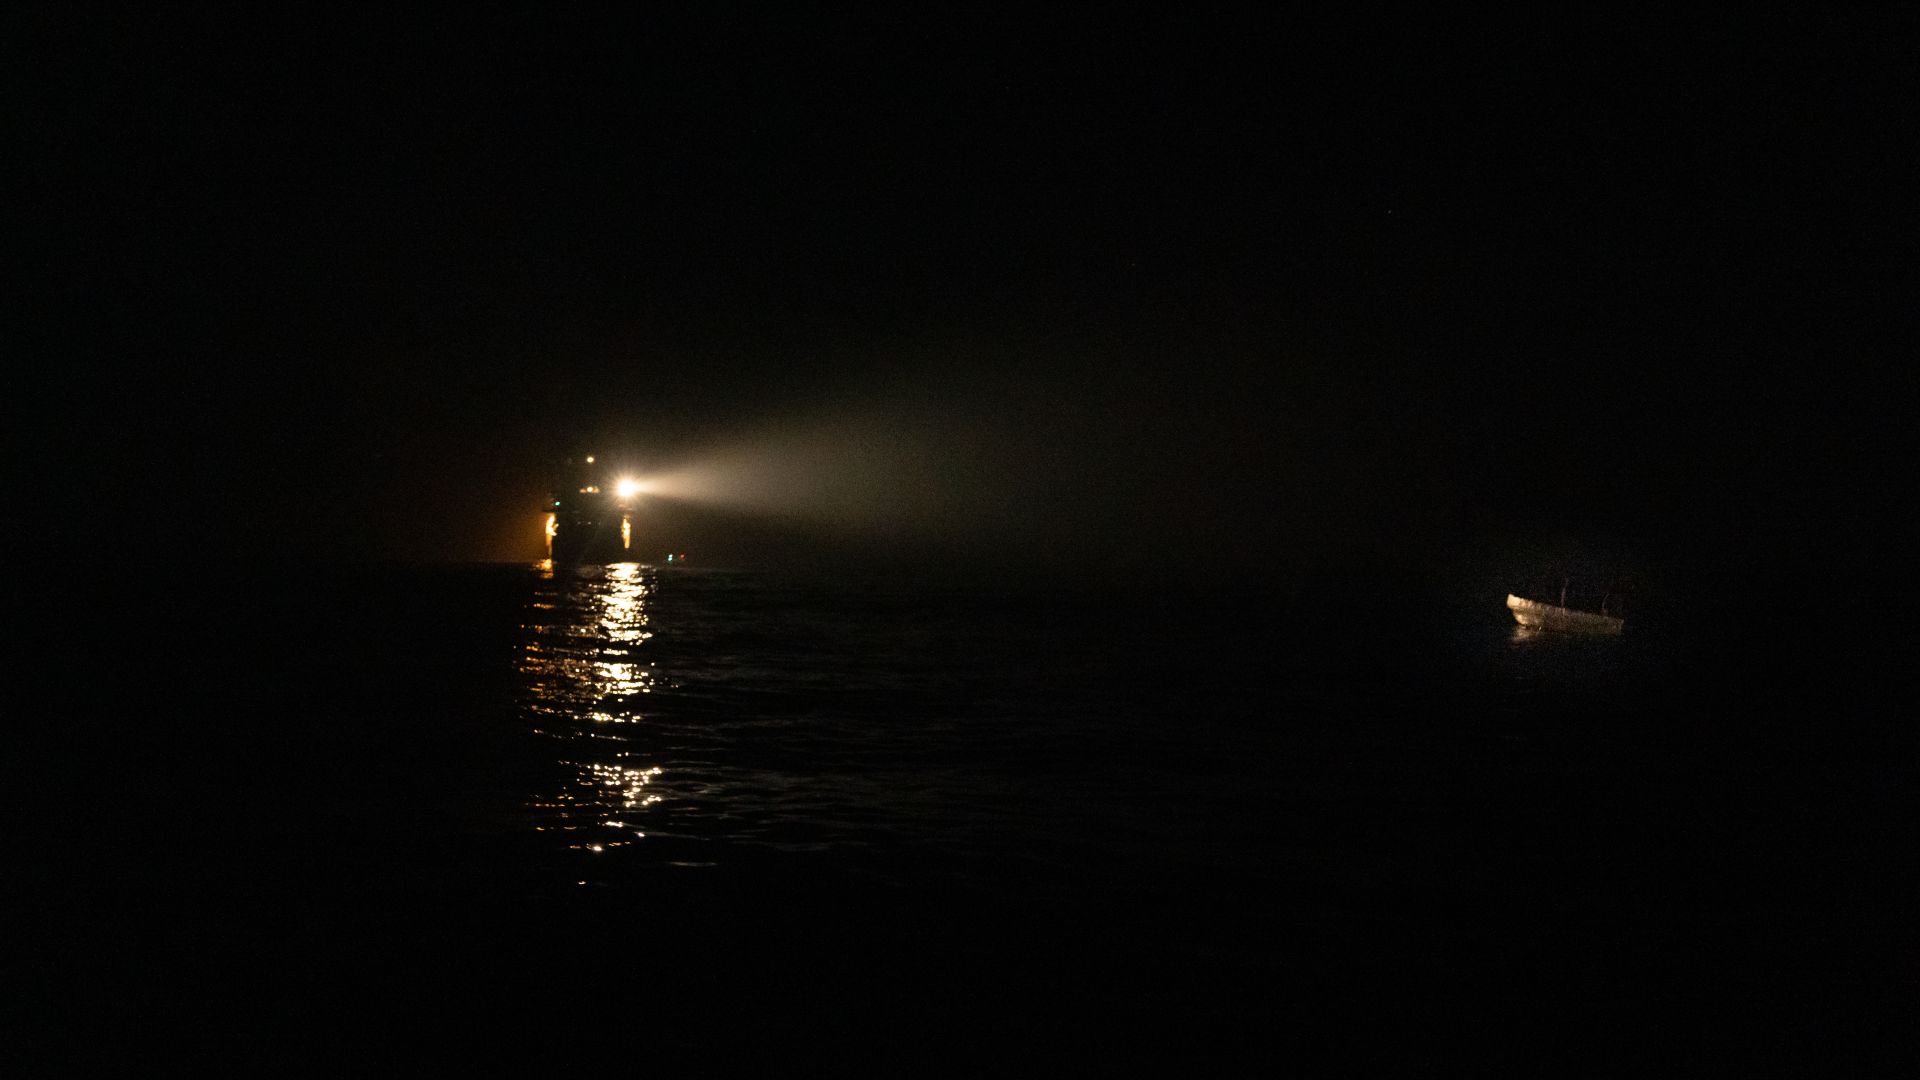 A ship's spotlight reflects on a small boat in distress